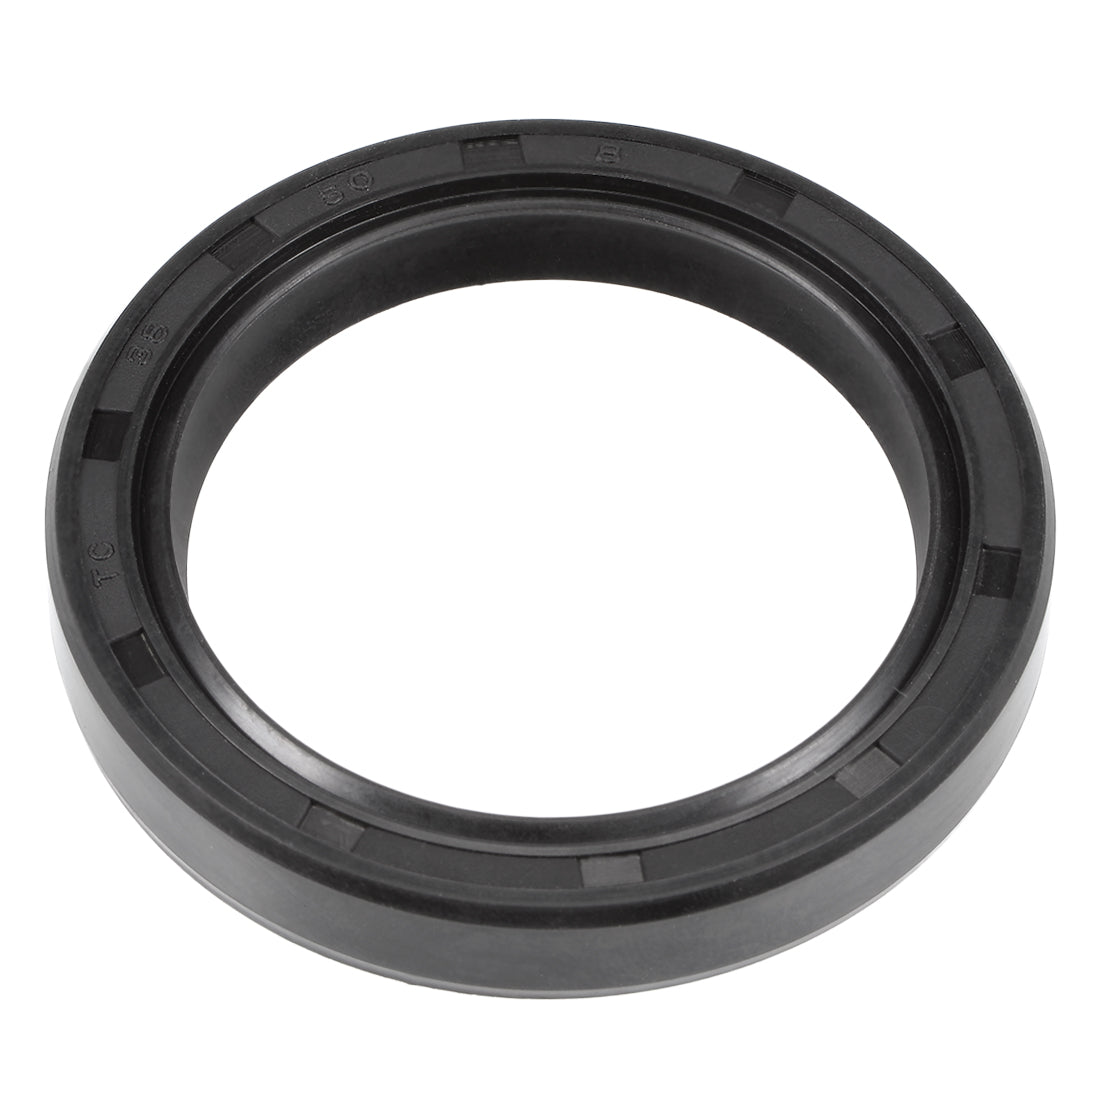 Uxcell Uxcell Oil Seal, TC 38mm x 62mm x 8mm, Nitrile Rubber Cover Double Lip